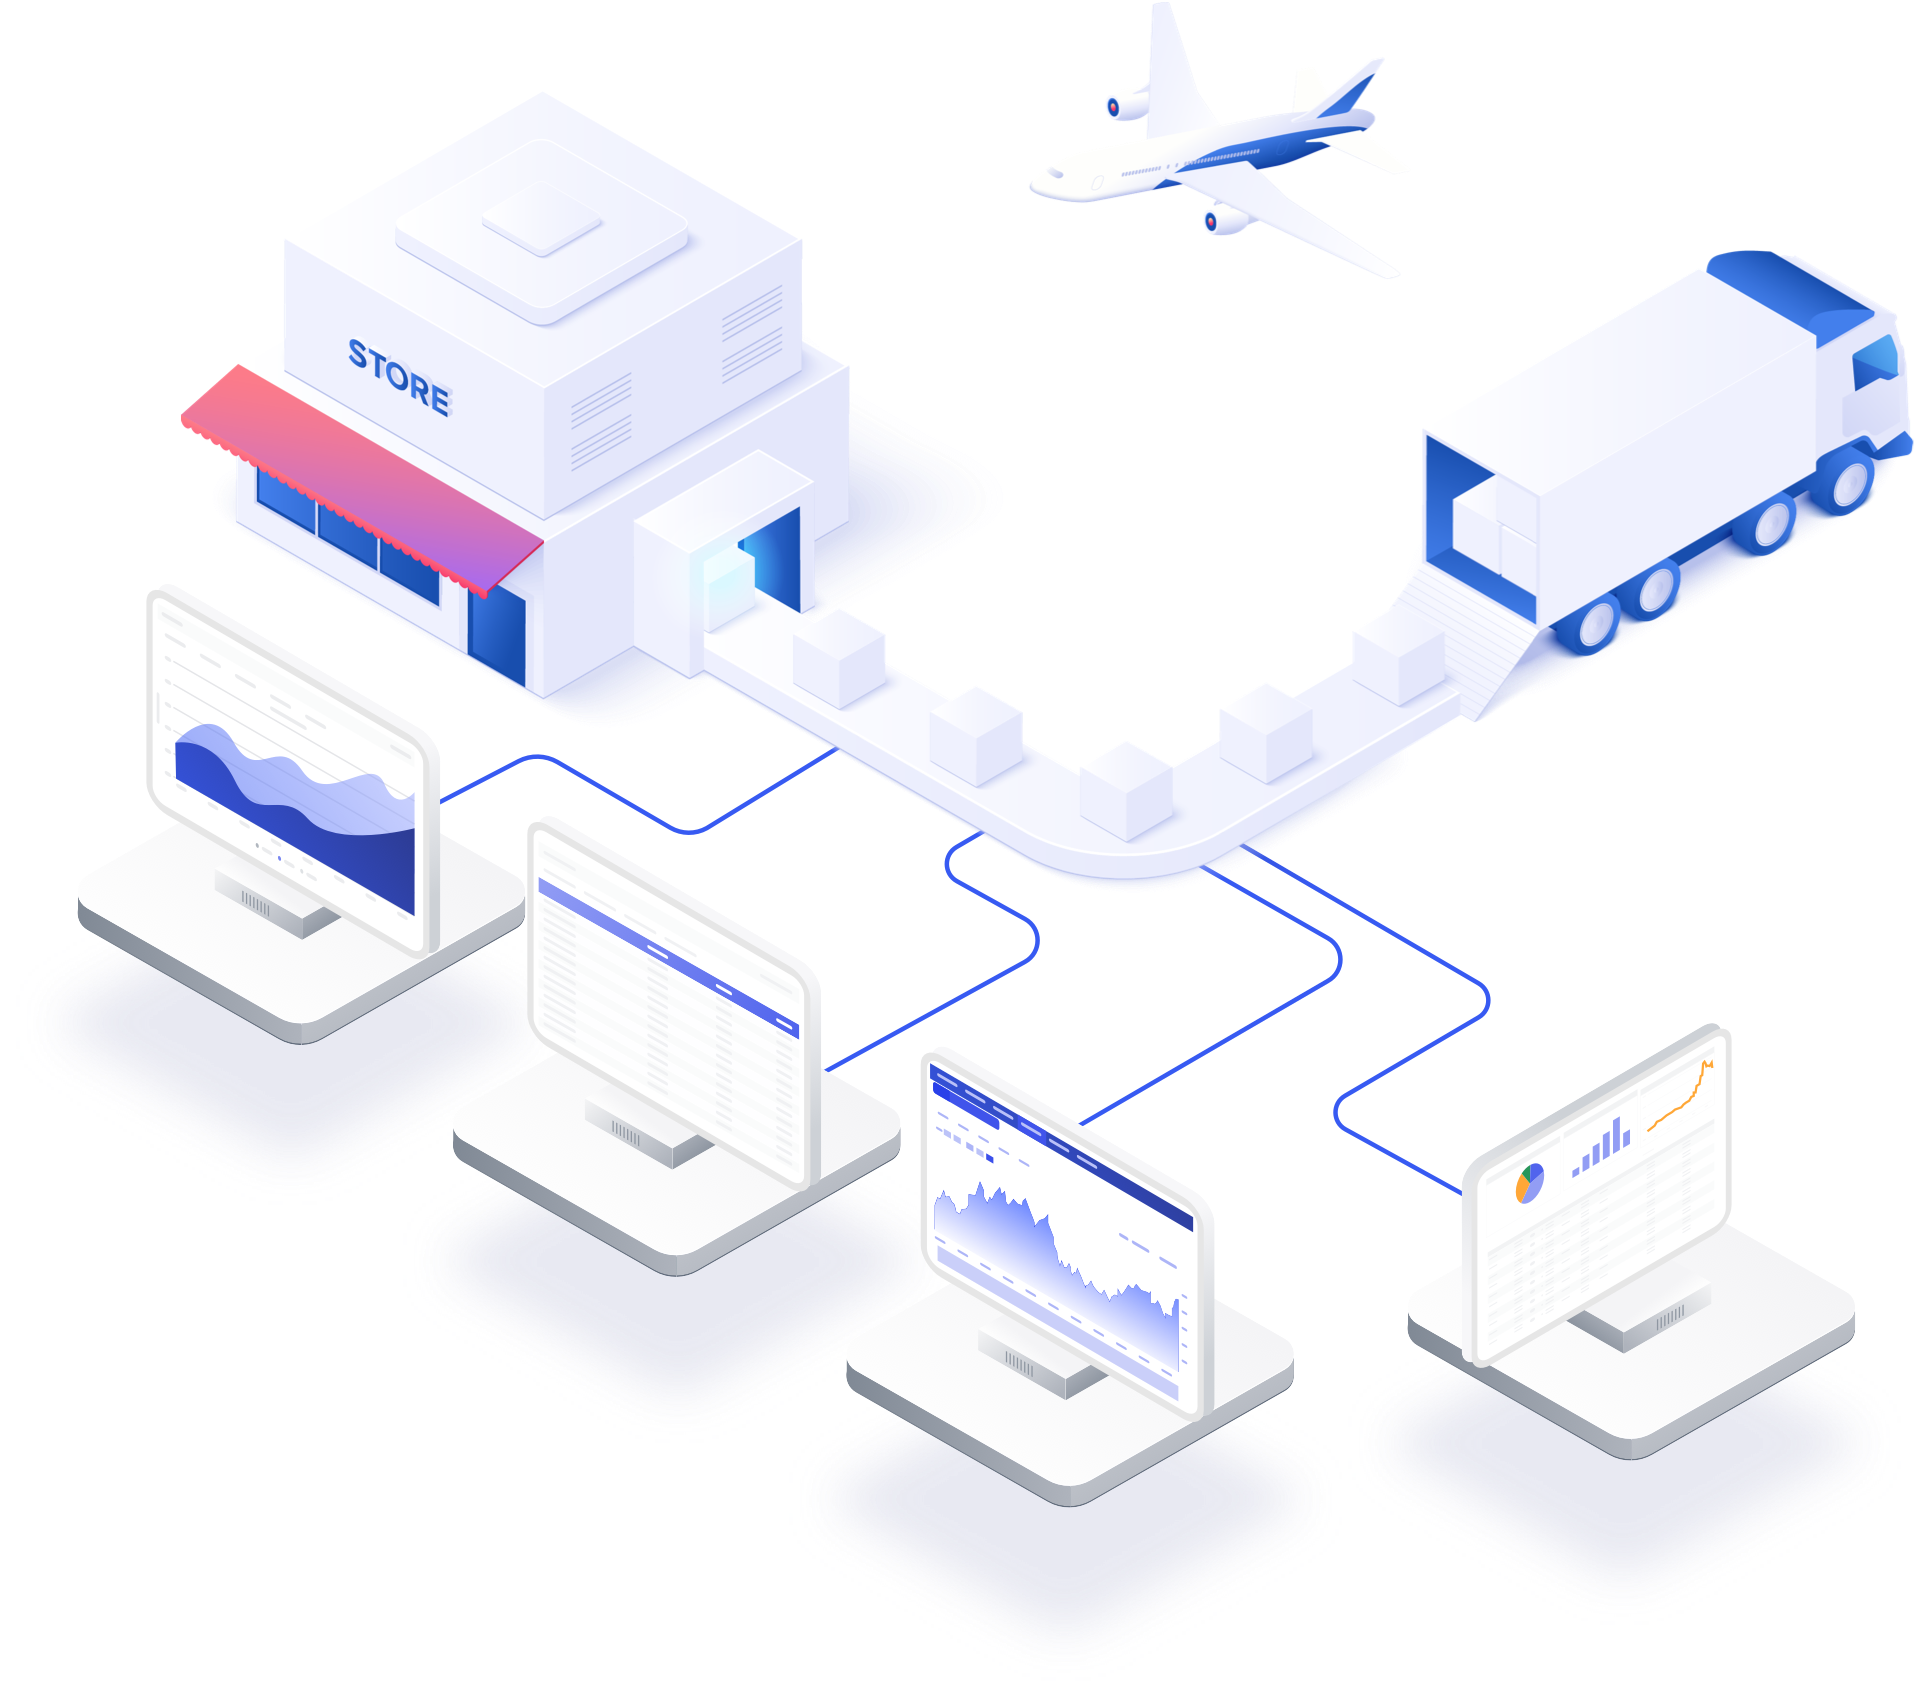 Depiction of supply chain process through computers being hooked up with a belt where a truck is delivering goods to a store